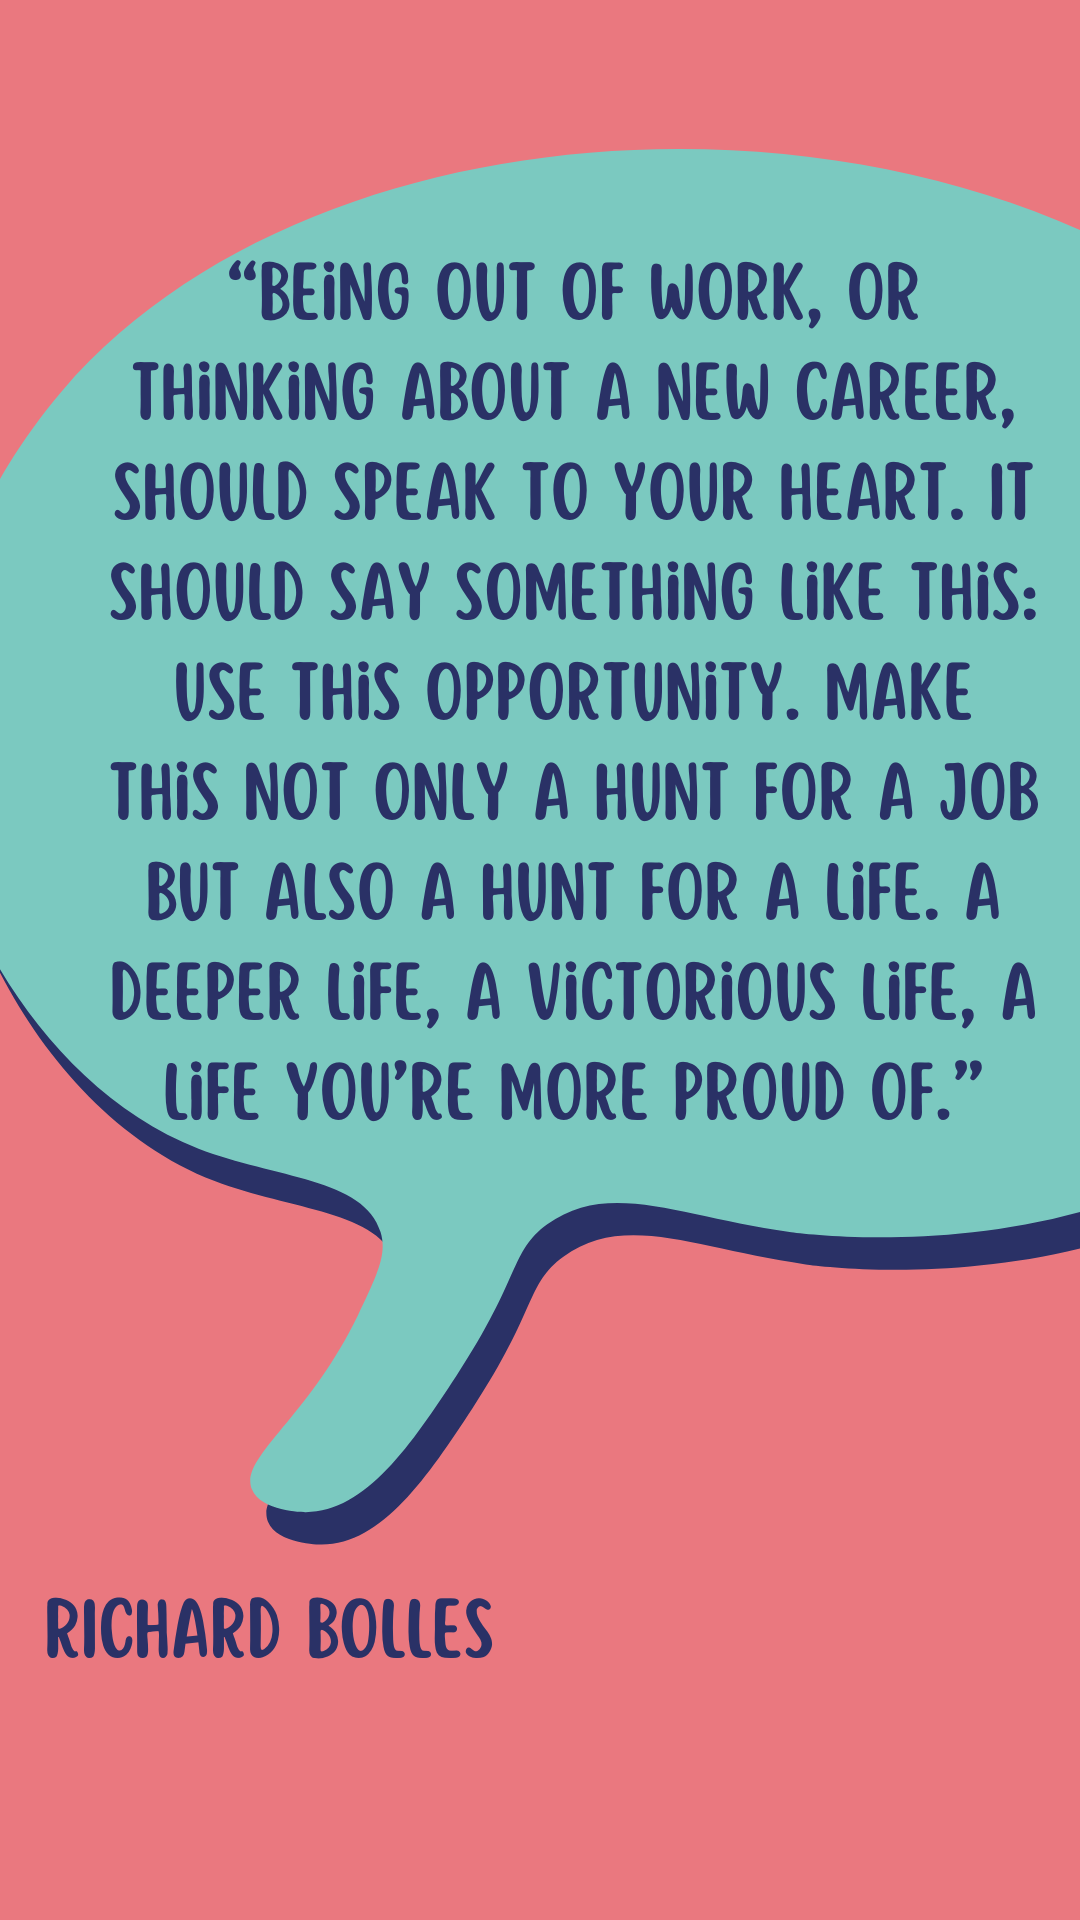 According to Richard Bolles, “Being out of work, or thinking about a new career, should speak to your heart. It should say something like this: Use this opportunity. Make this not only a hunt for a job but also a hunt for a life. A deeper life, a victorious life, a life you’re more proud of.”